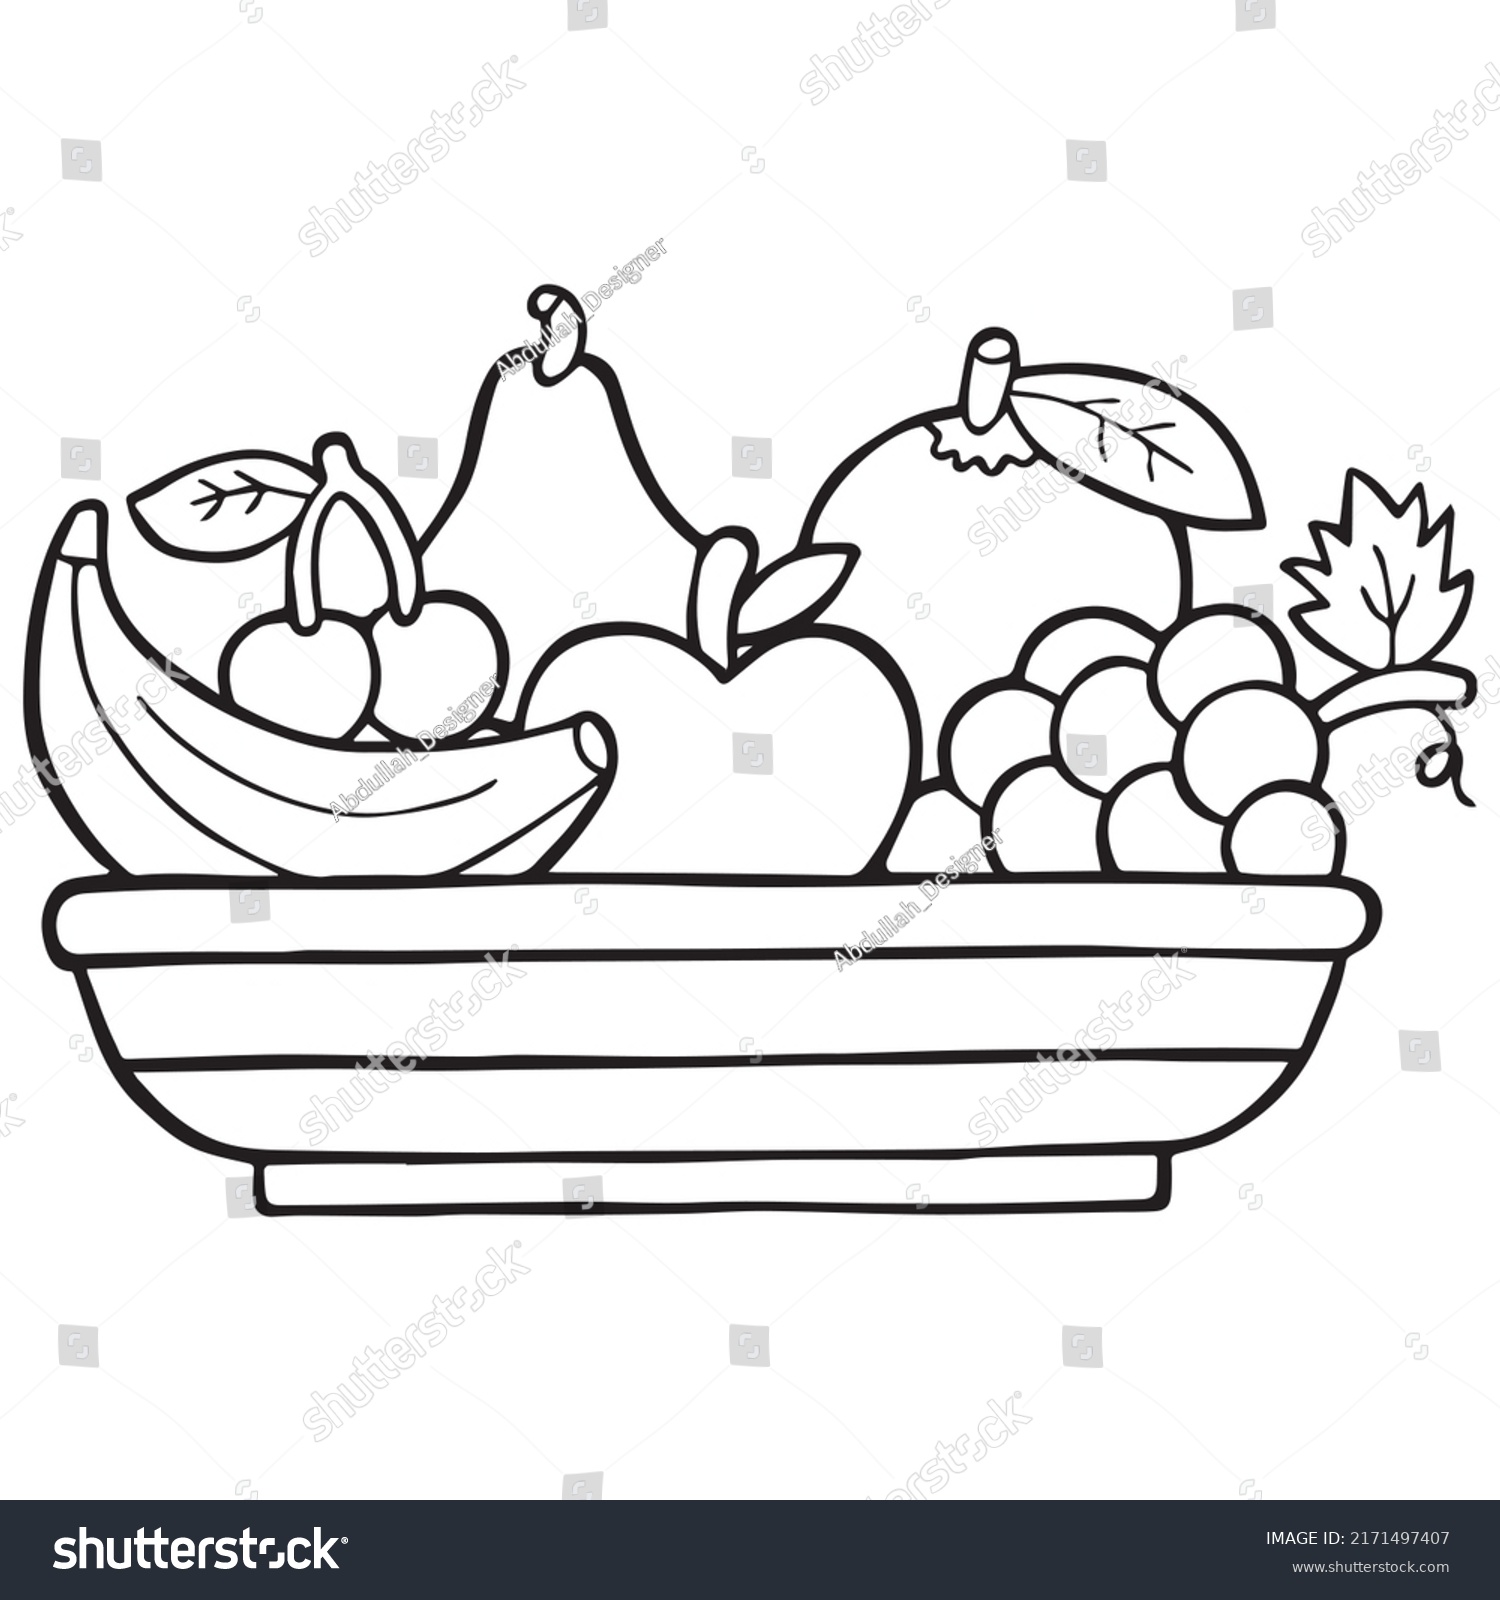 Fruit basket coloring page kids vector stock vector royalty free